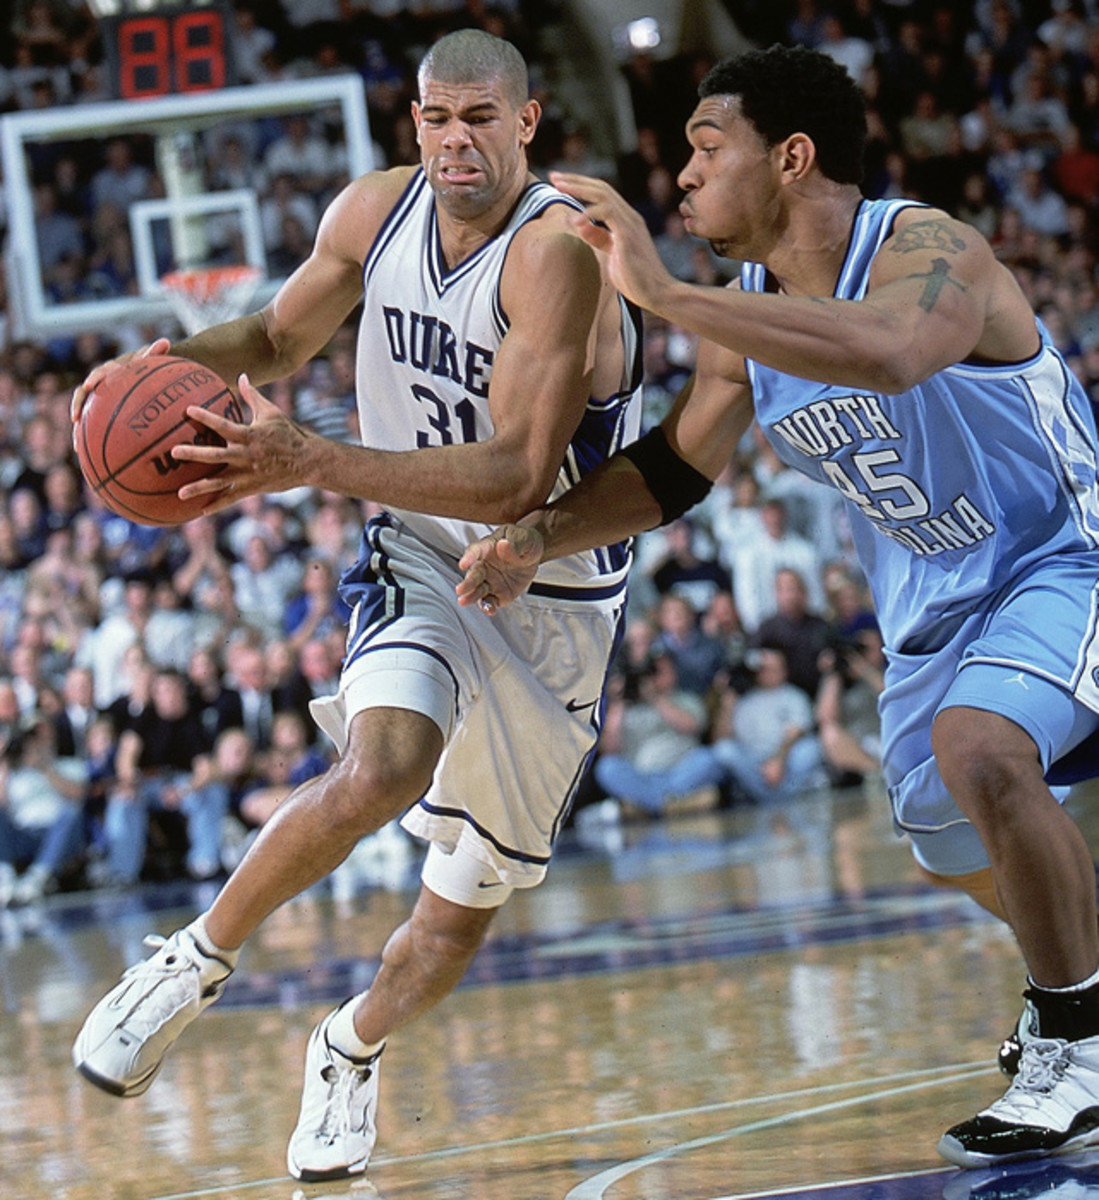 Shane Battier and Julius Peppers